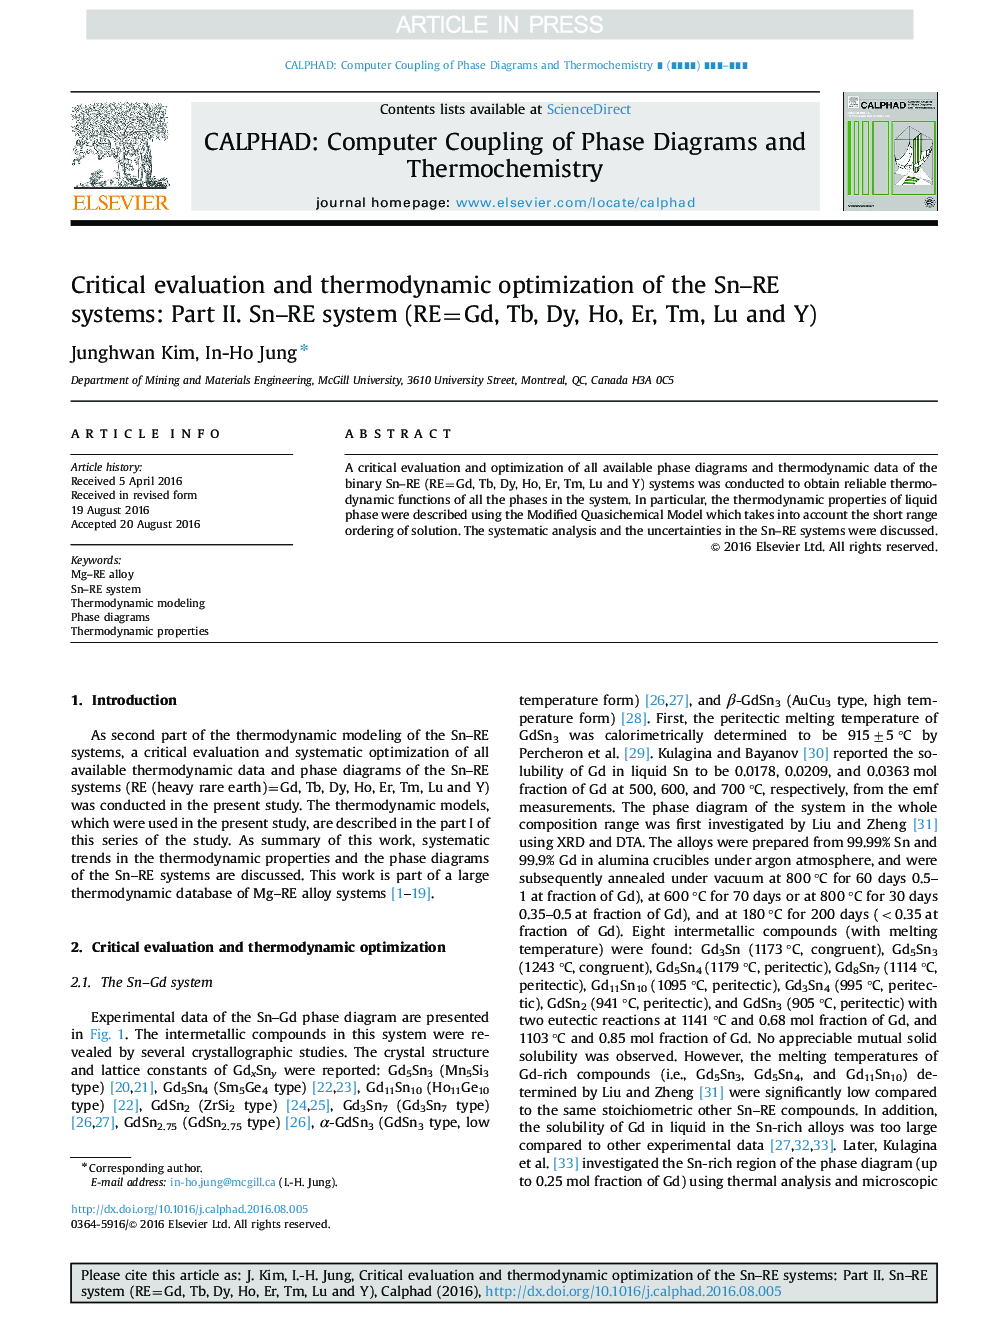 Critical evaluation and thermodynamic optimization of the Sn-RE systems: Part II. Sn-RE system (RE=Gd, Tb, Dy, Ho, Er, Tm, Lu and Y)